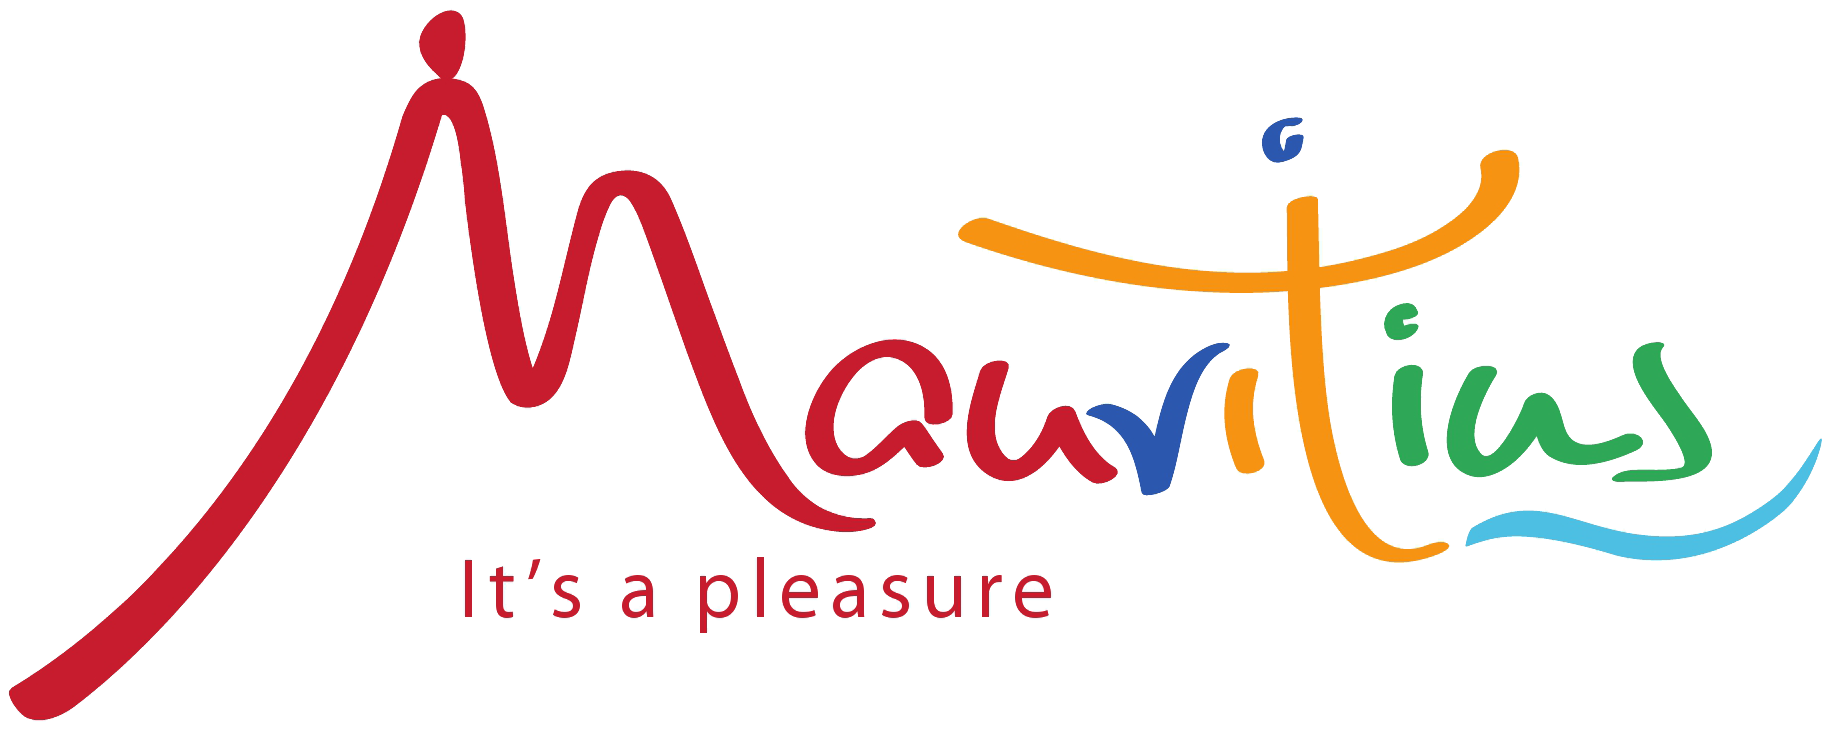 A Logo With Text On It